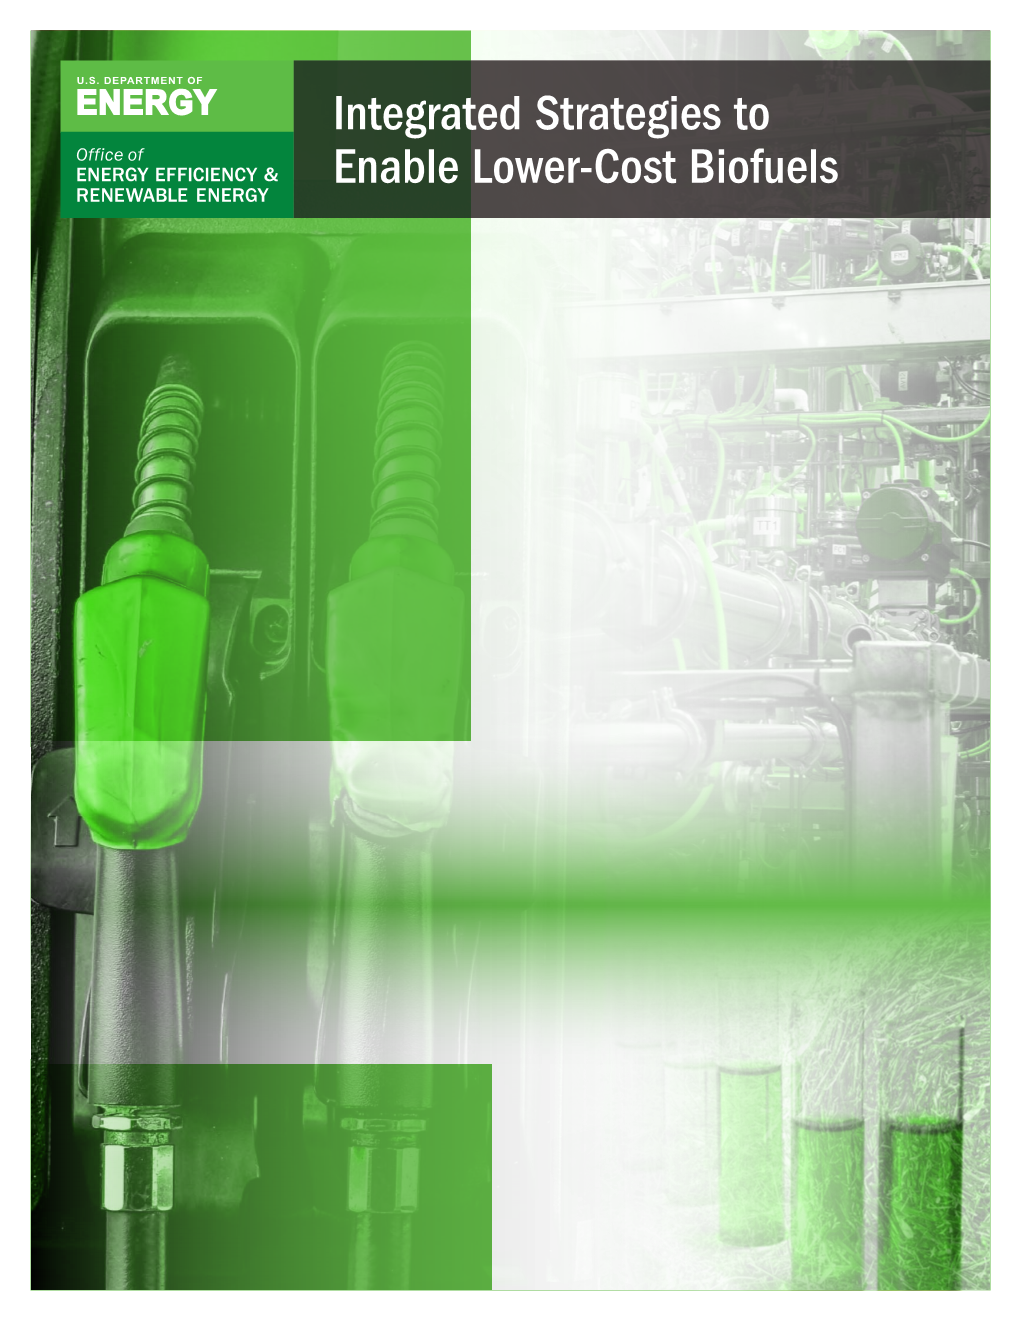 Integrated Strategies to Enable Lower-Cost Biofuels